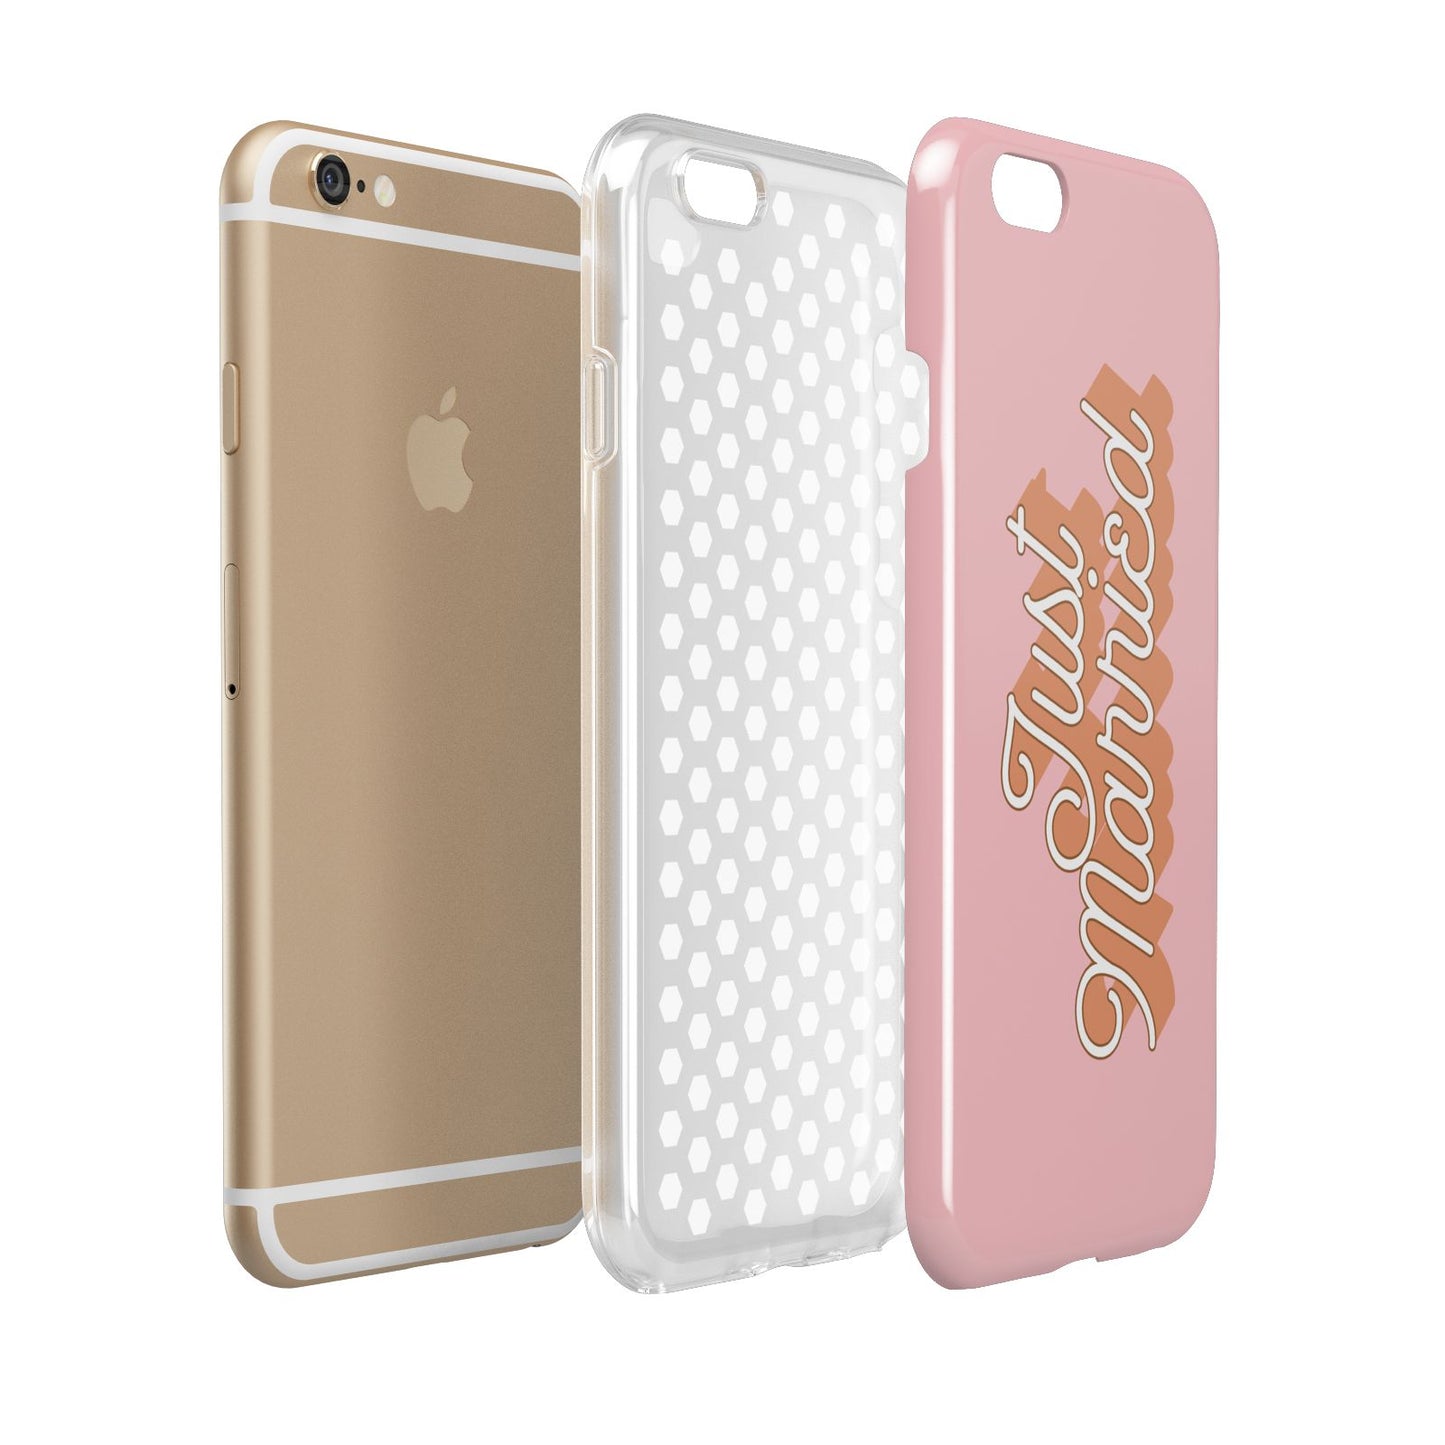 Just Married Pink Apple iPhone 6 3D Tough Case Expanded view